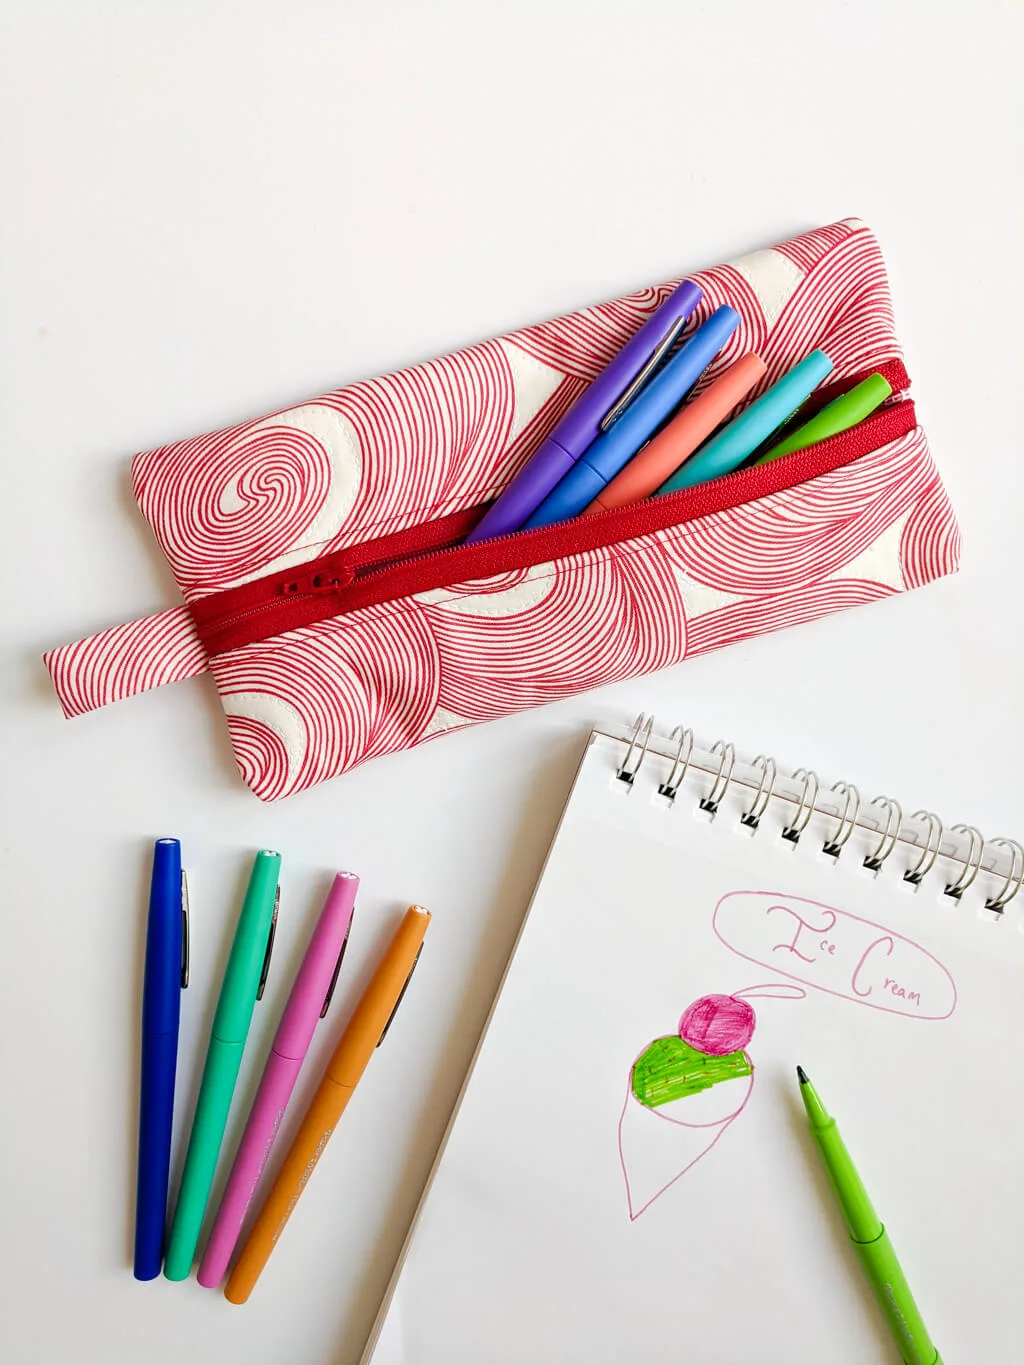 DIY pencil case sewing project with a zipper